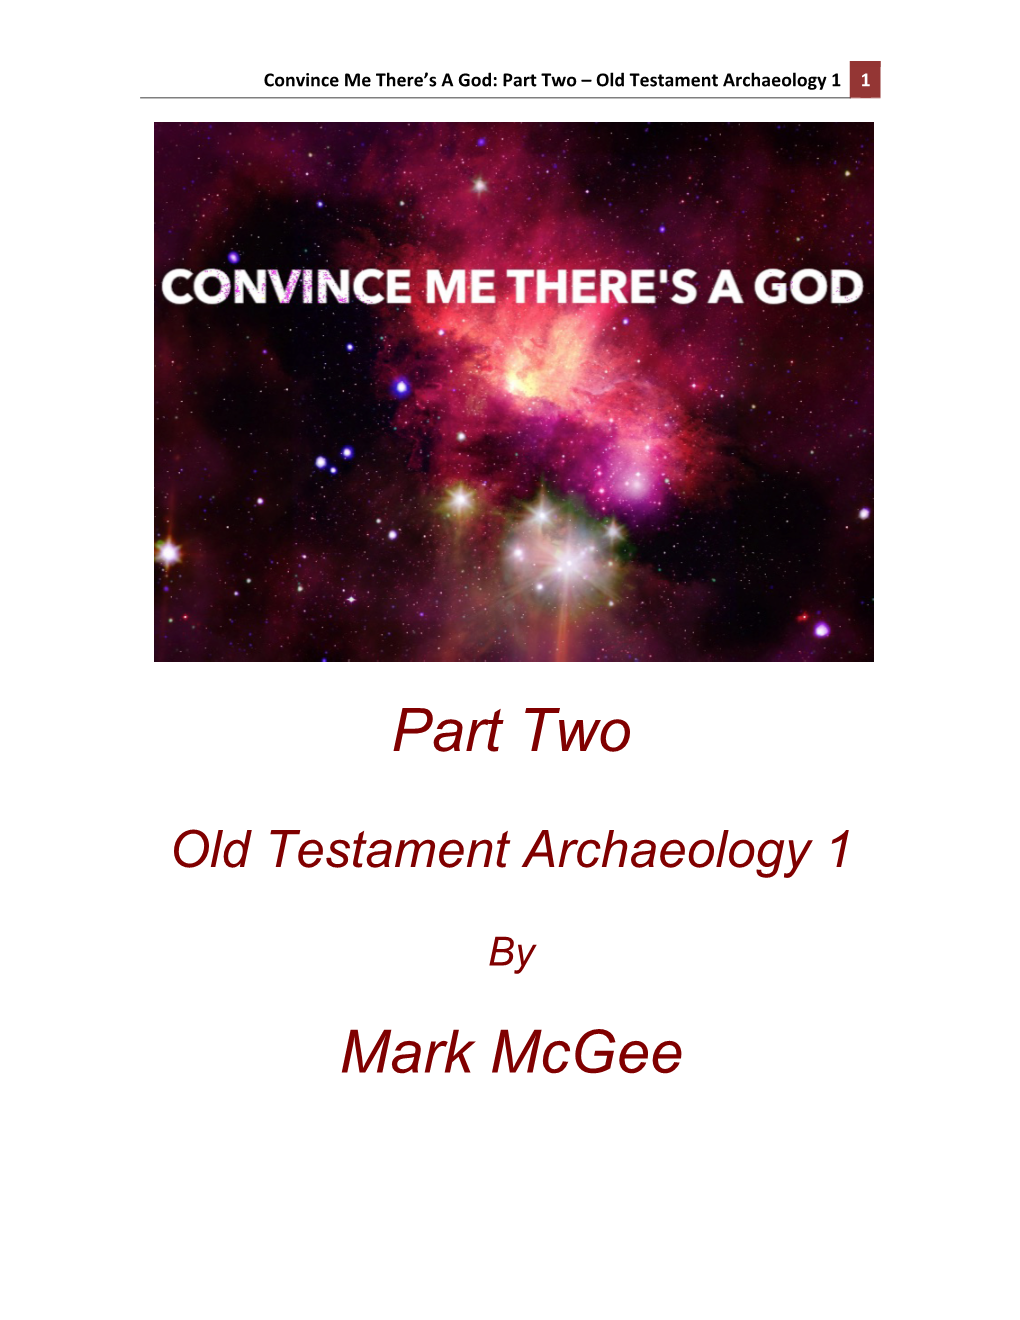 Old Testament Archaeology 1 1